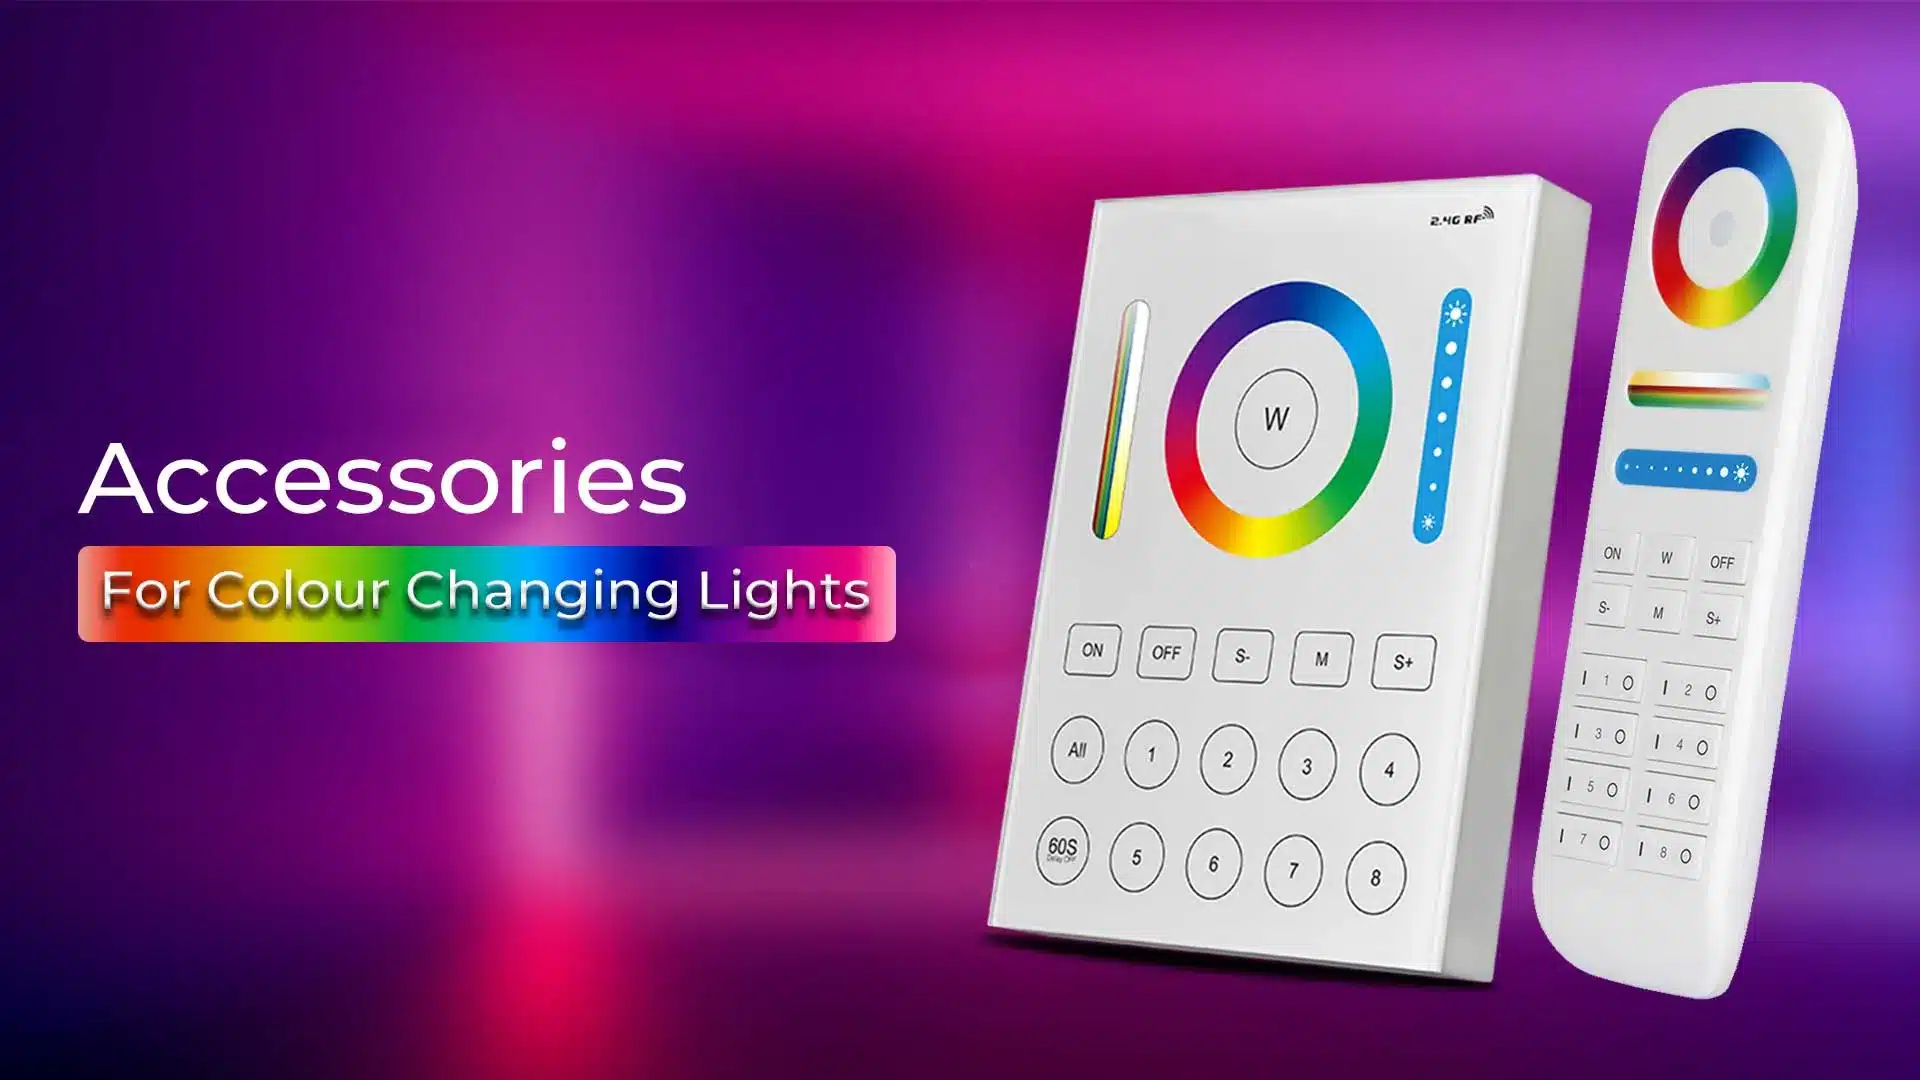 Accessories for colour changing lights